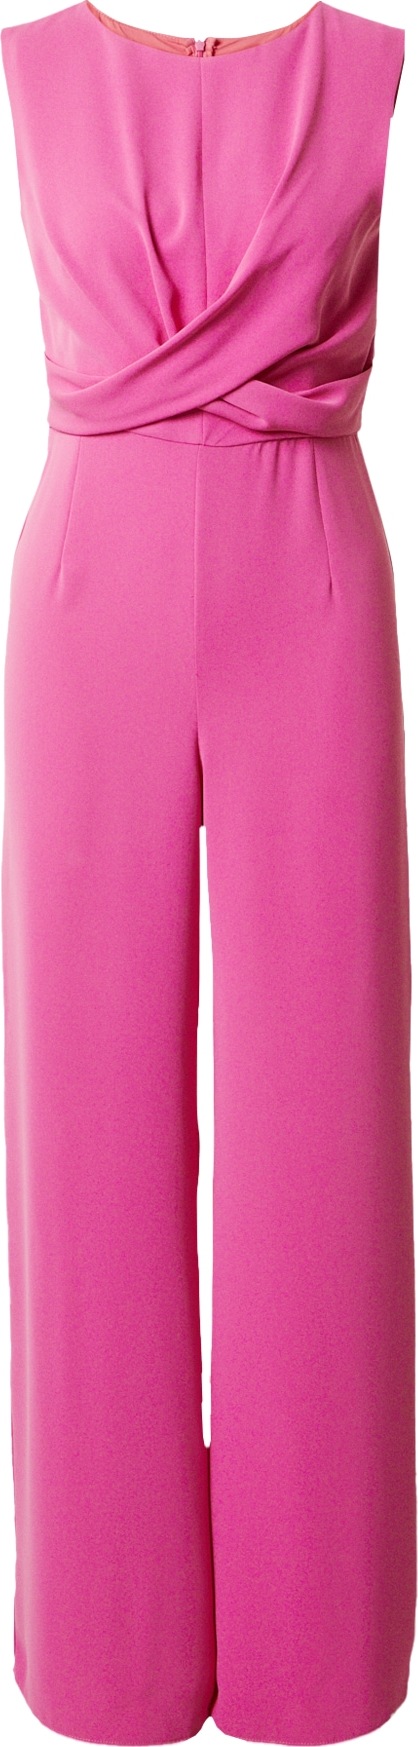 Coast Overal pink